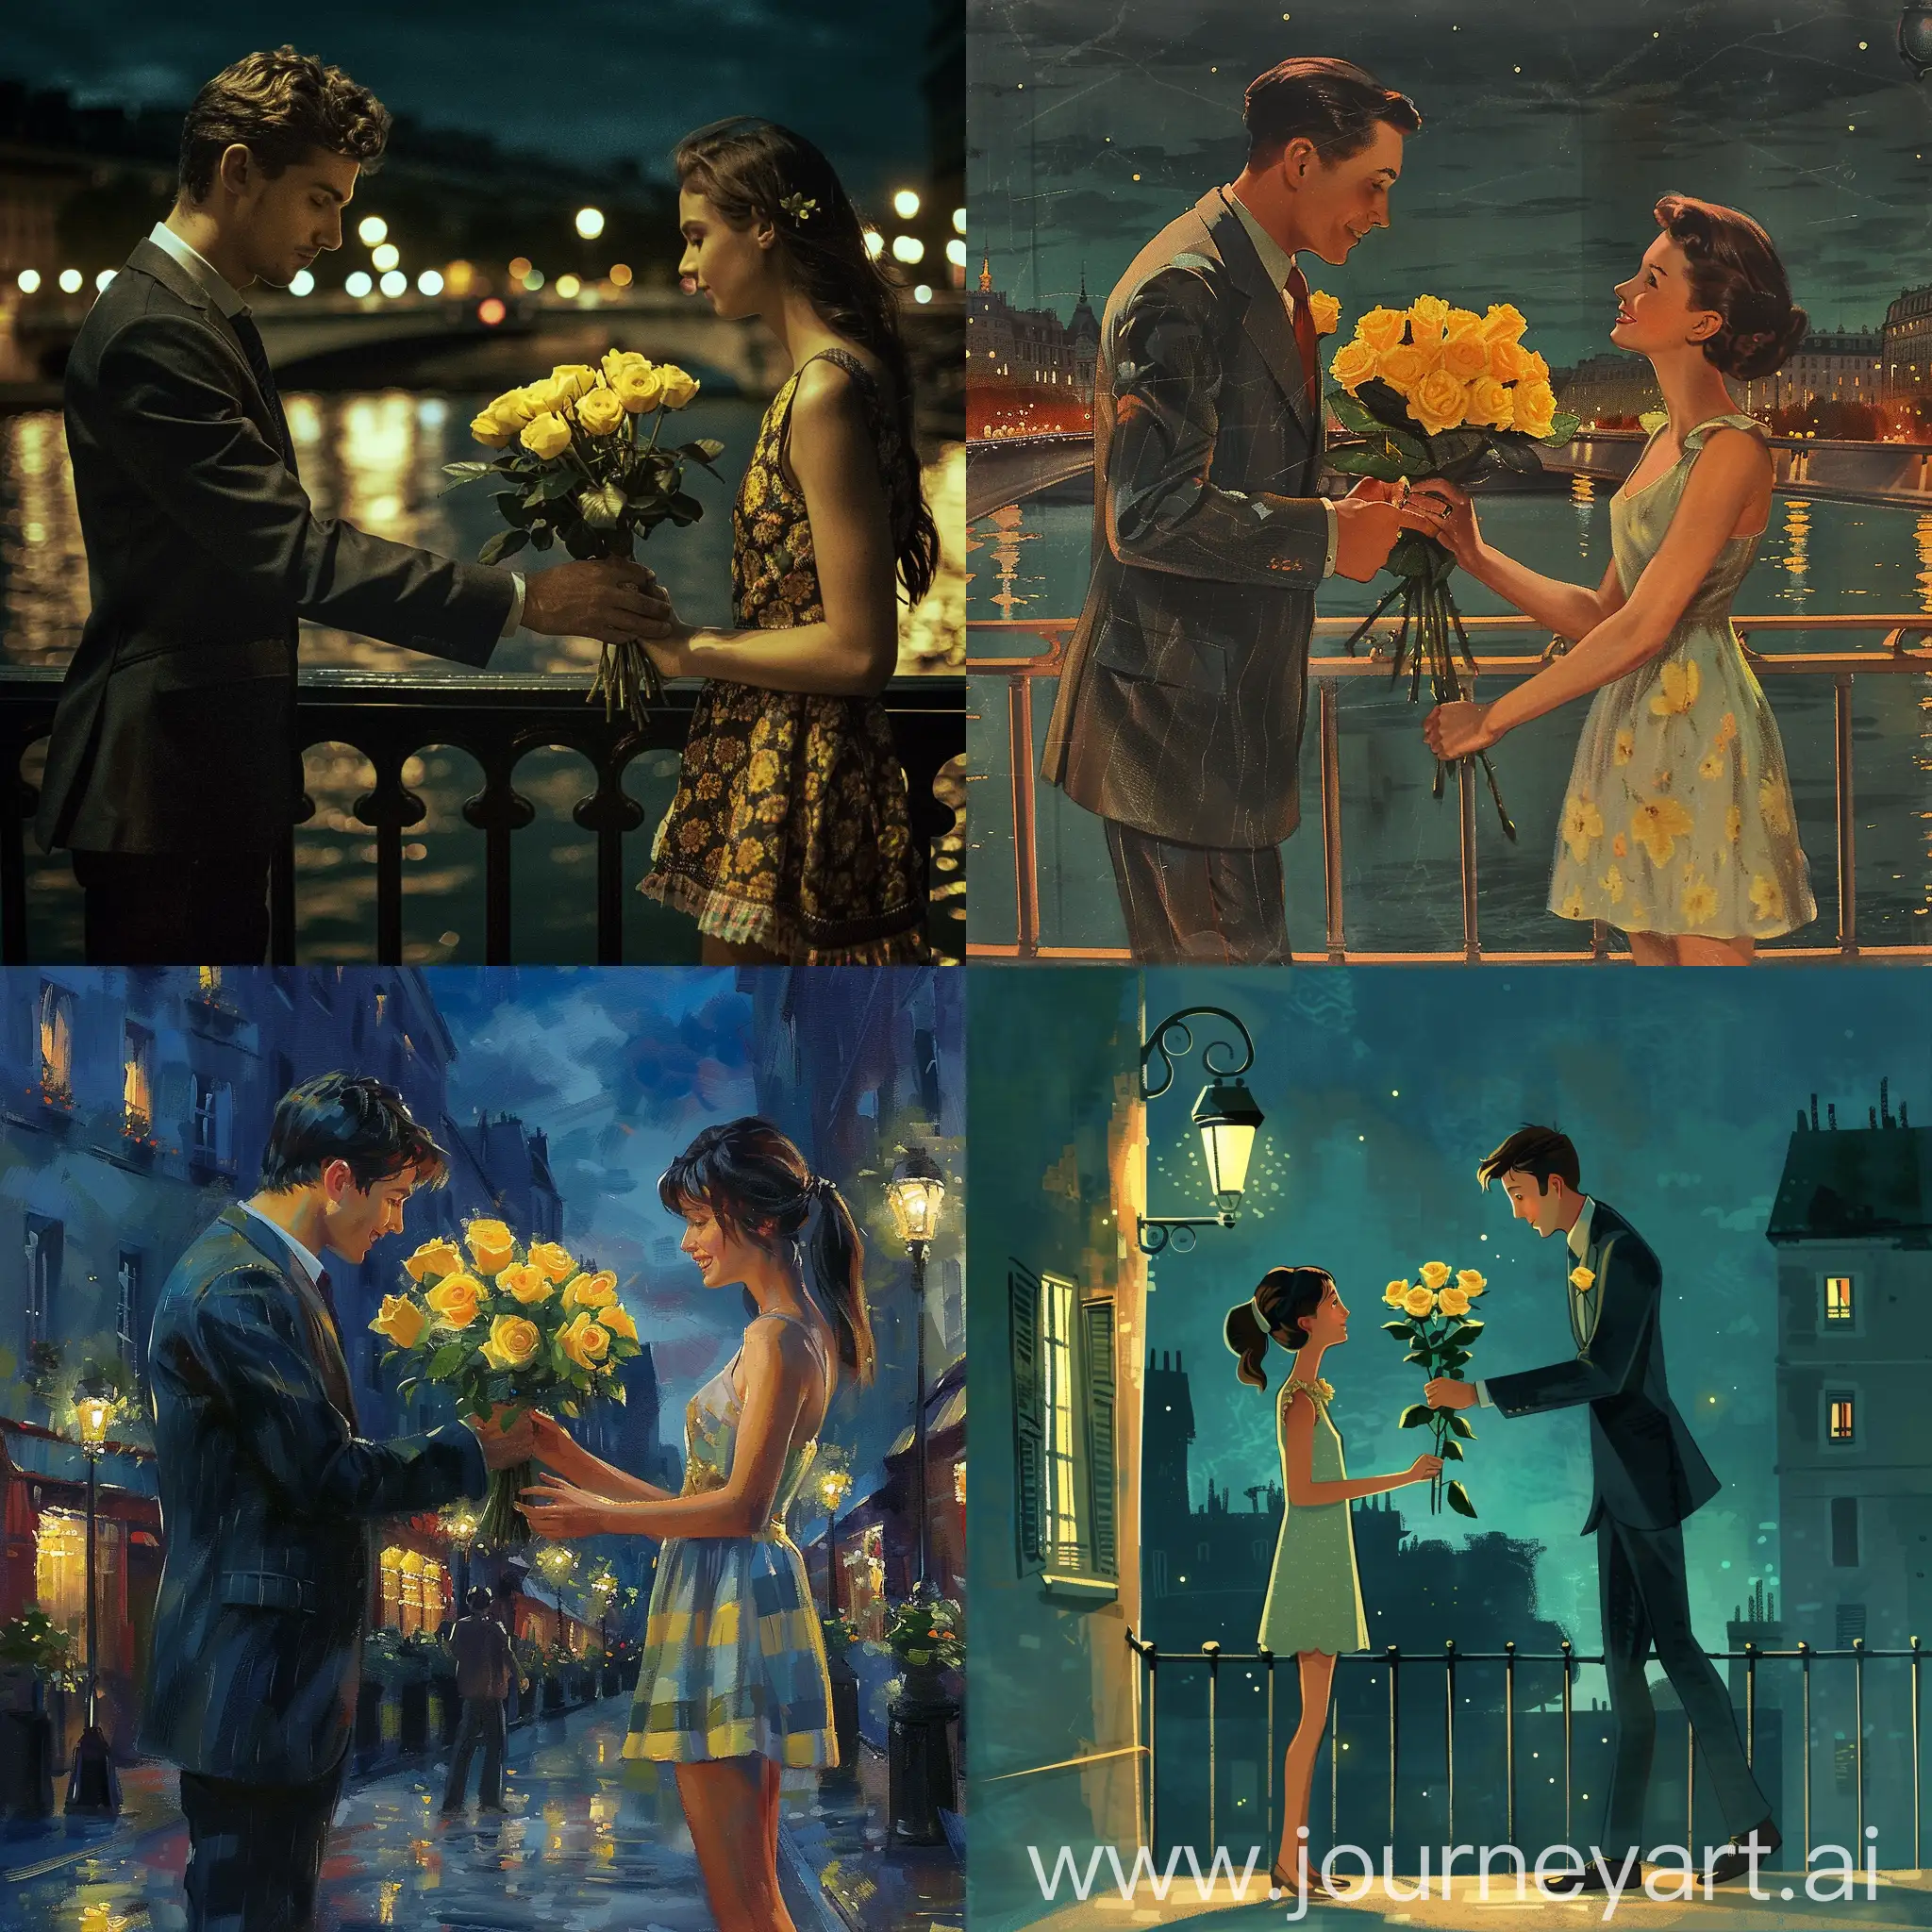 A gentle man in suits gives a bouquet of yellow roses to a girl in summer dress. Romantic style. Paris night.